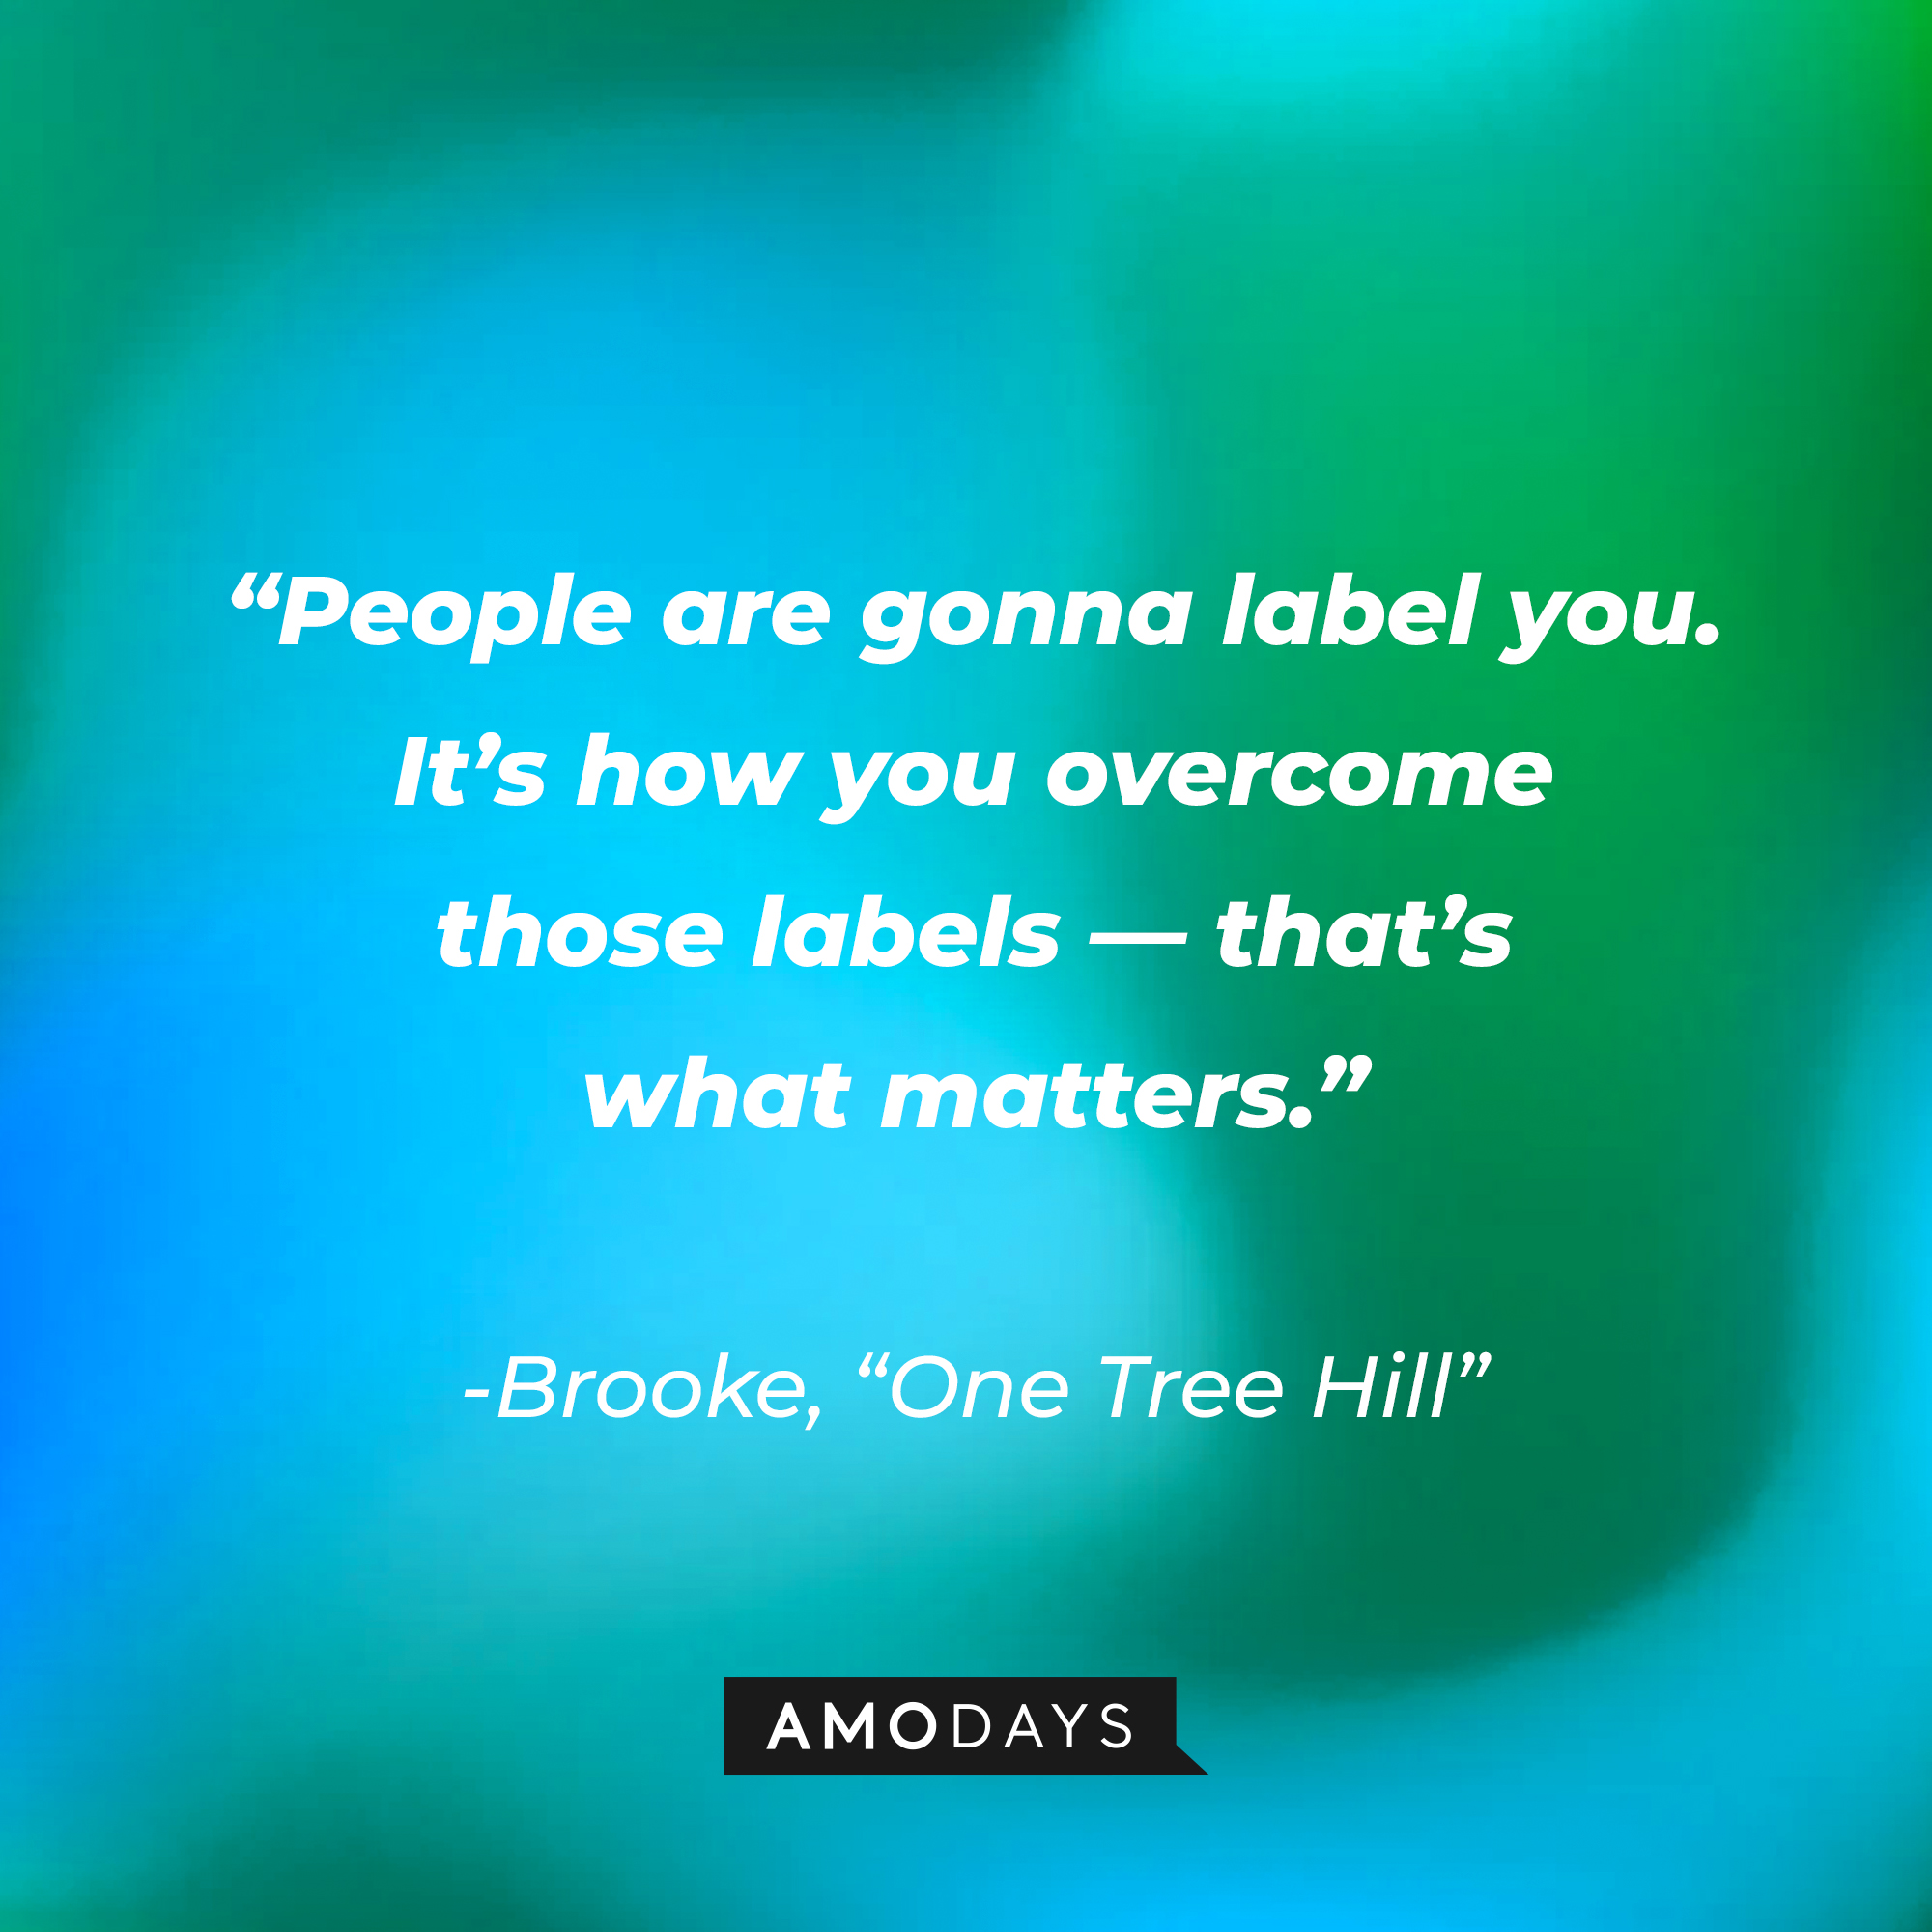 Brooke’s quote from “One Tree Hill”: “People are gonna label you. It’s how you overcome those labels — that’s what matters.” | Source: AmoDays